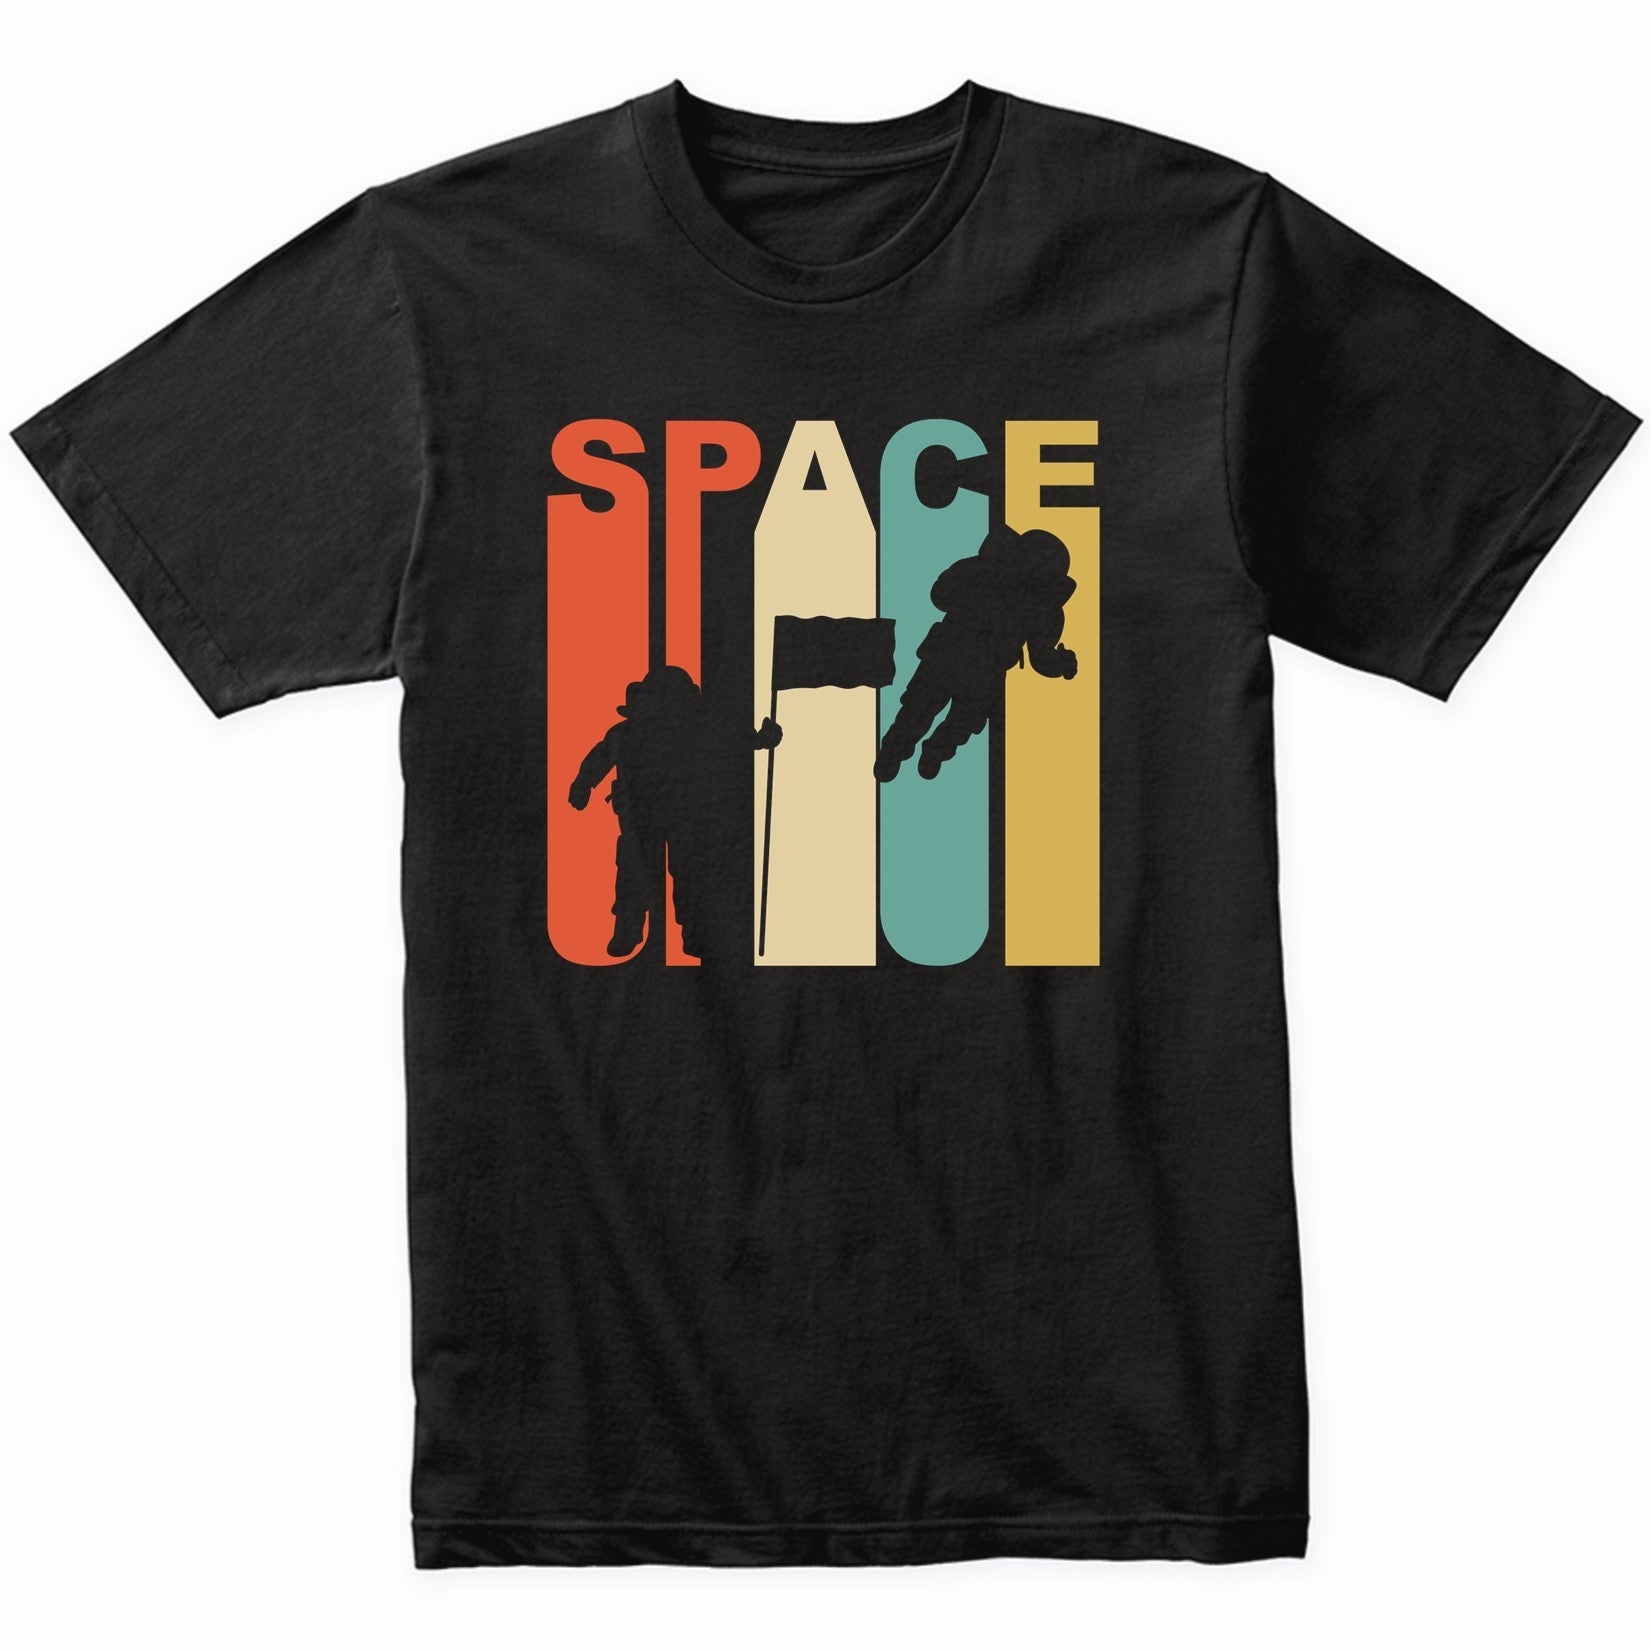 Retro 1970s Style Astronaut Silhouette Space Science T-Shirt